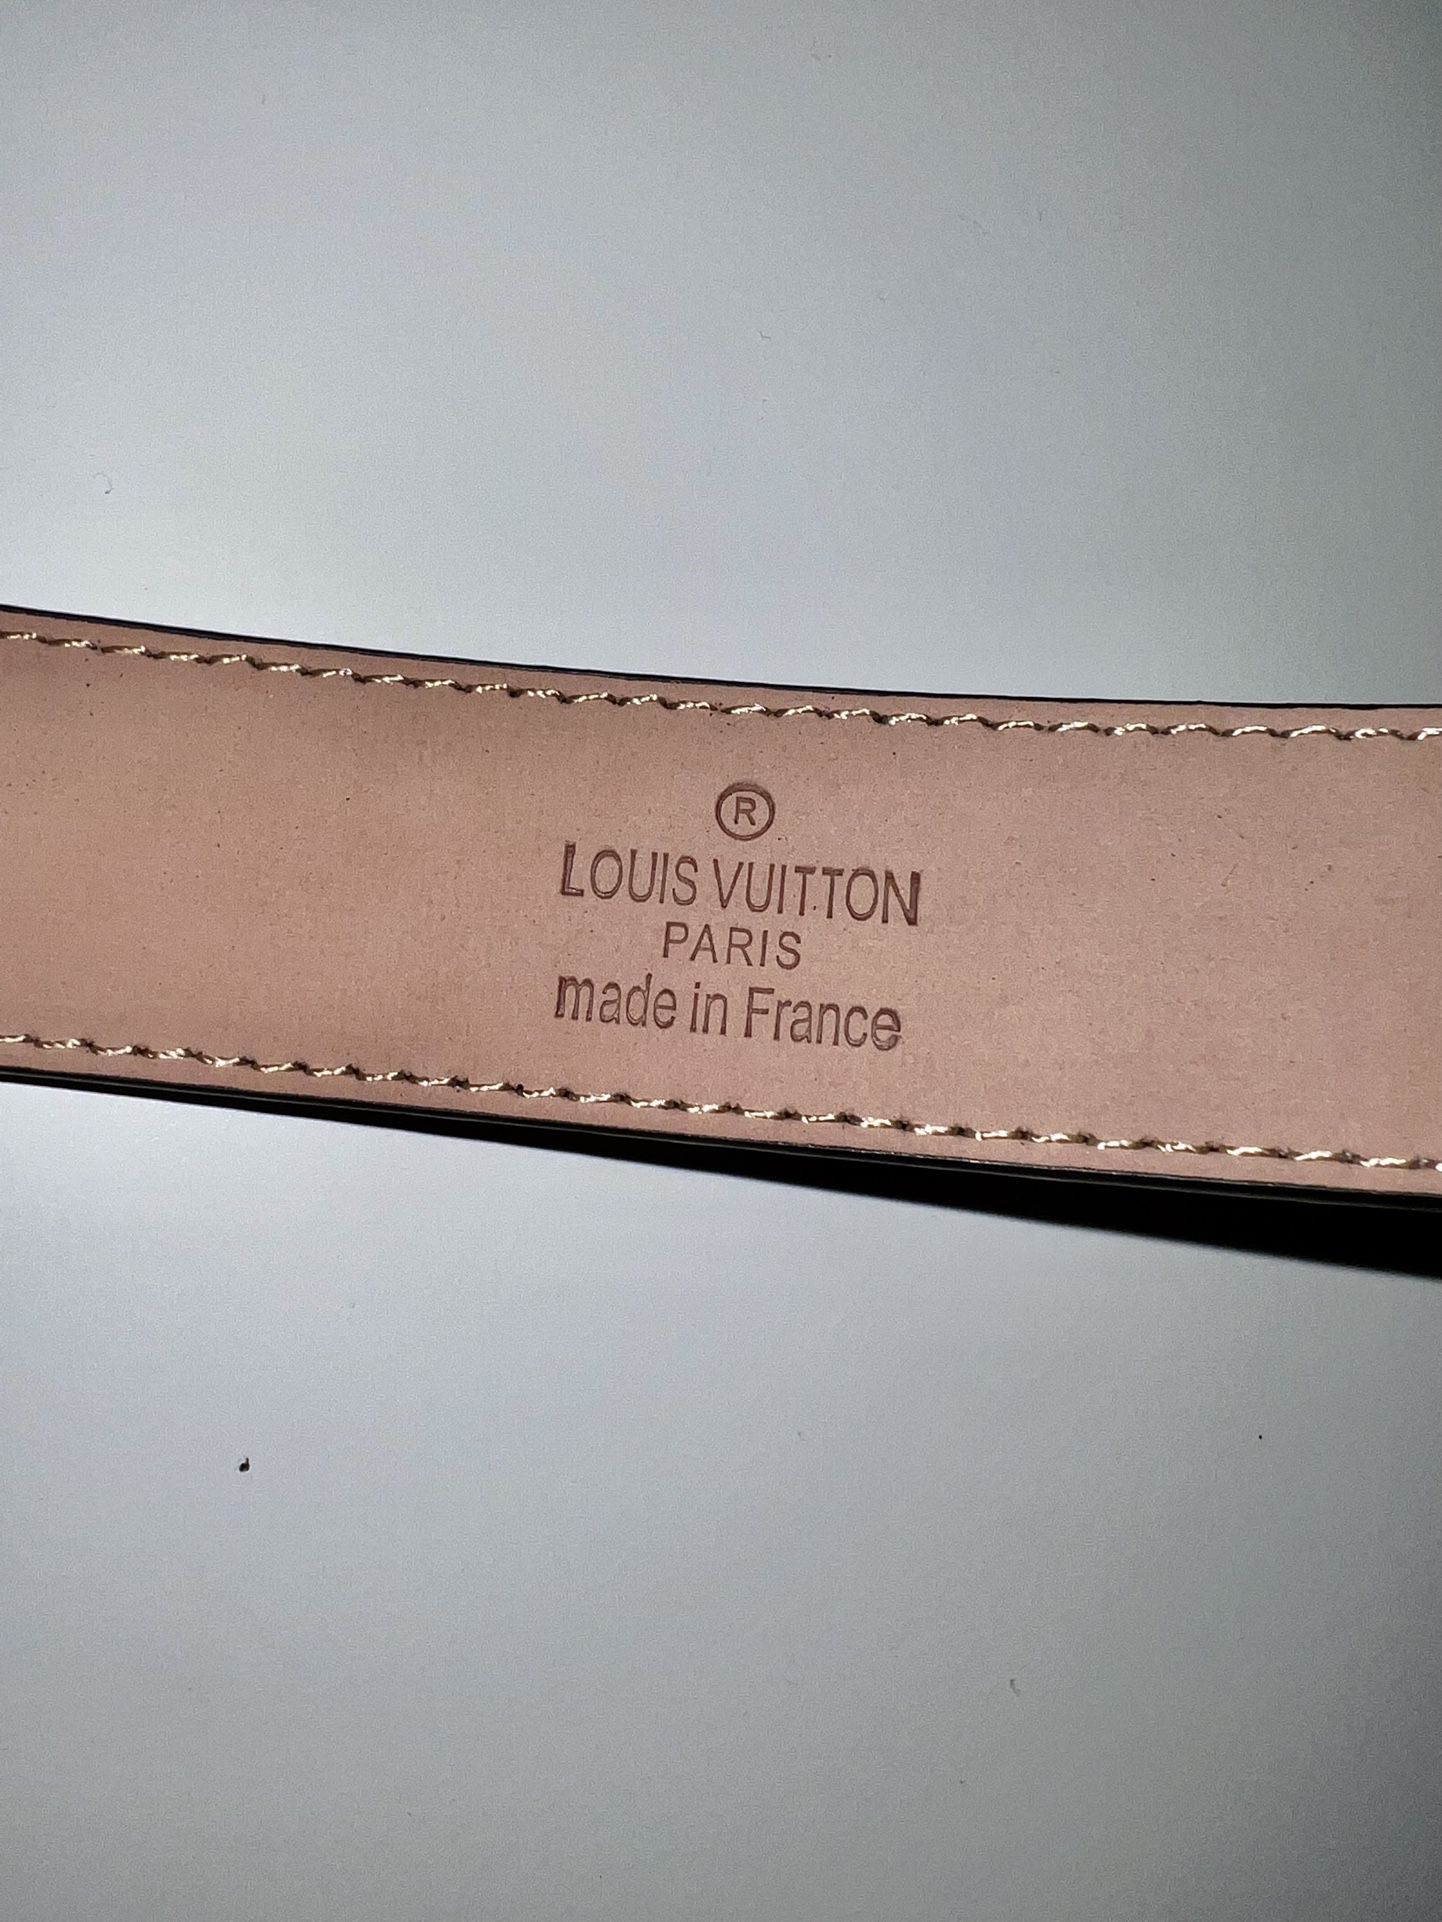 Louis Vuitton LV Shape Belt for Sale in Parma, OH - OfferUp